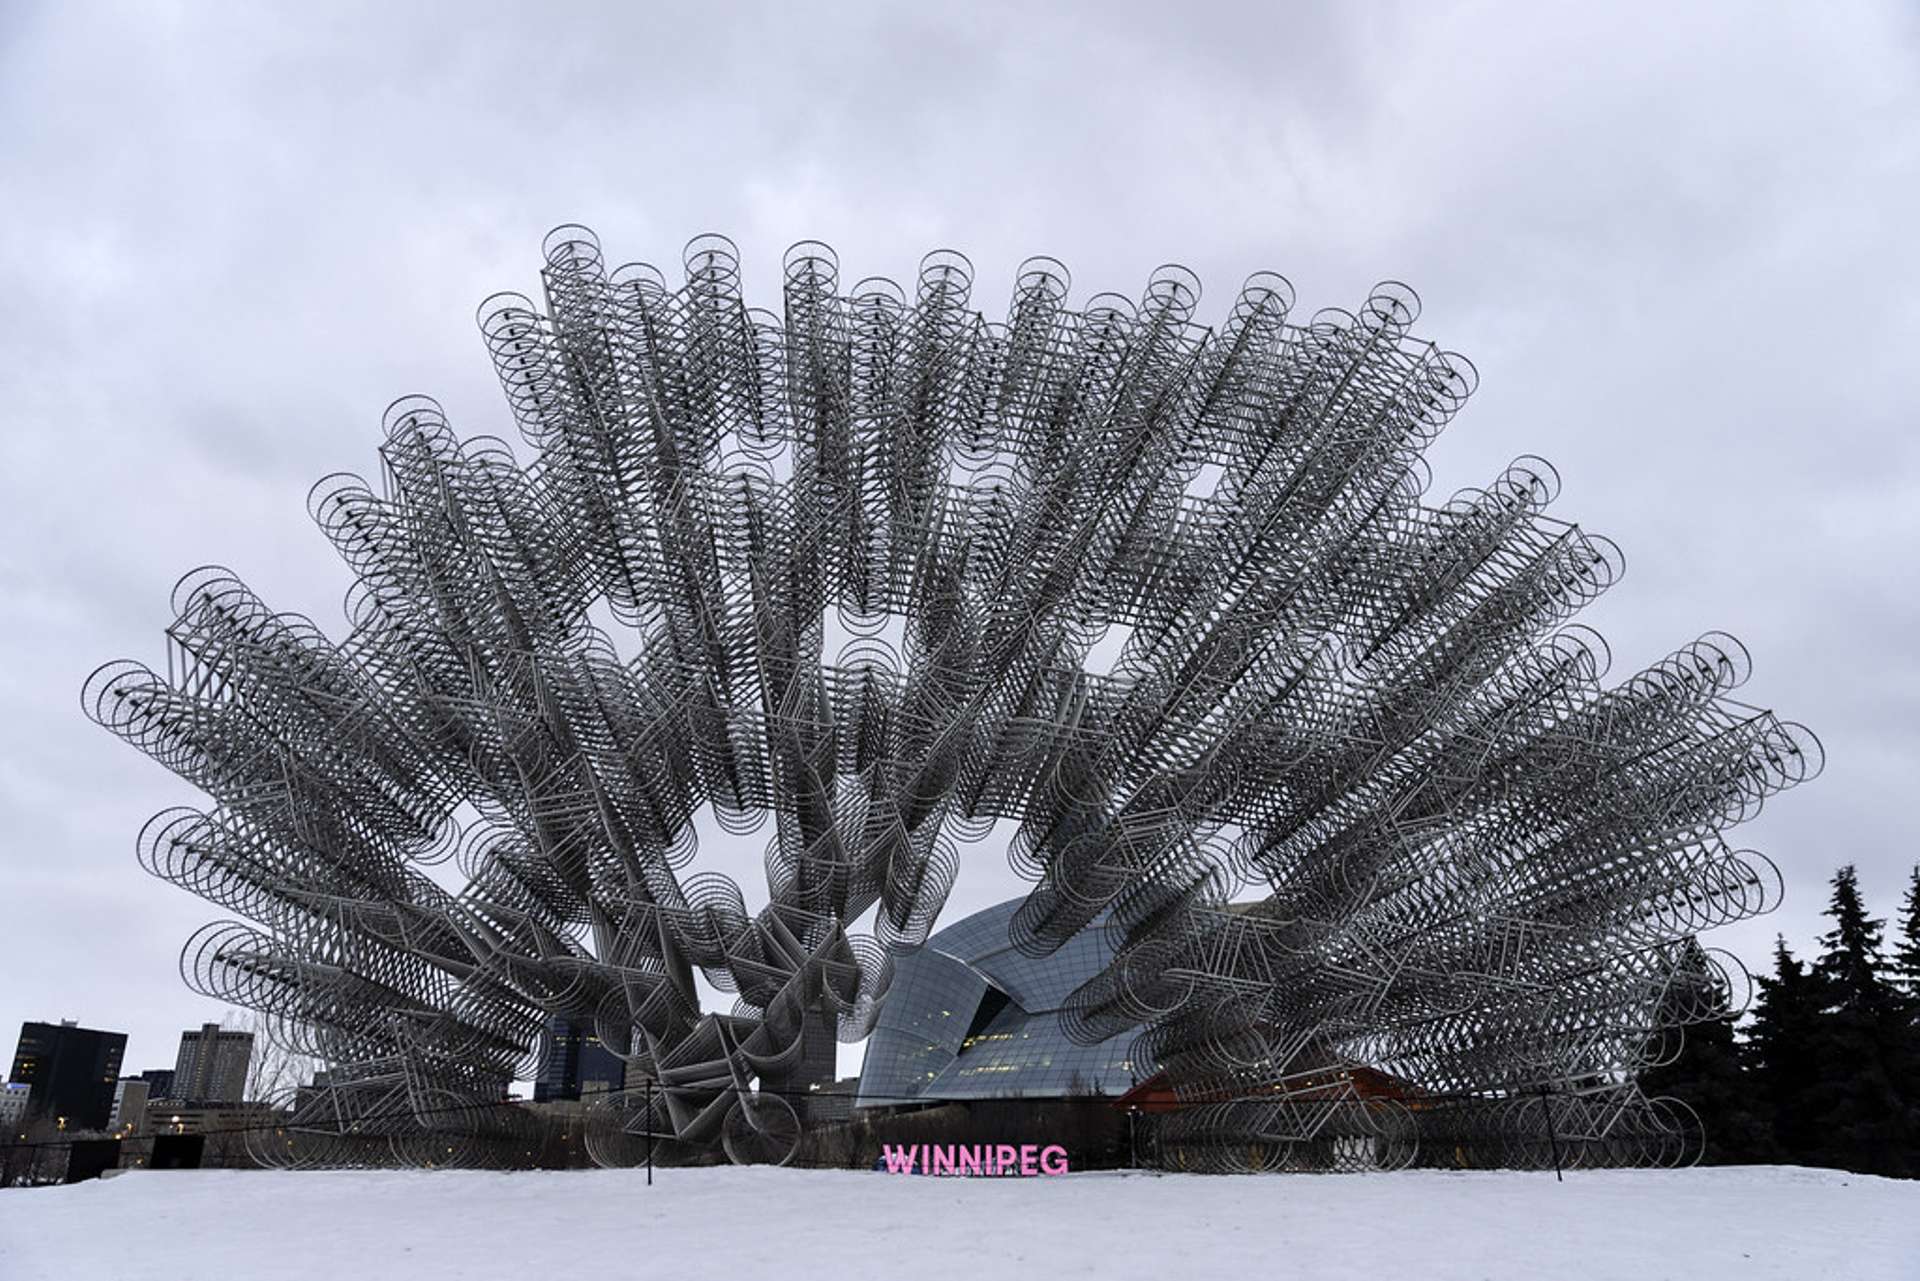 Forever Bicycles by Ai Weiwei (2011). Bicycle wheels arranged in a kaleidoscopic pattern in front of a building.